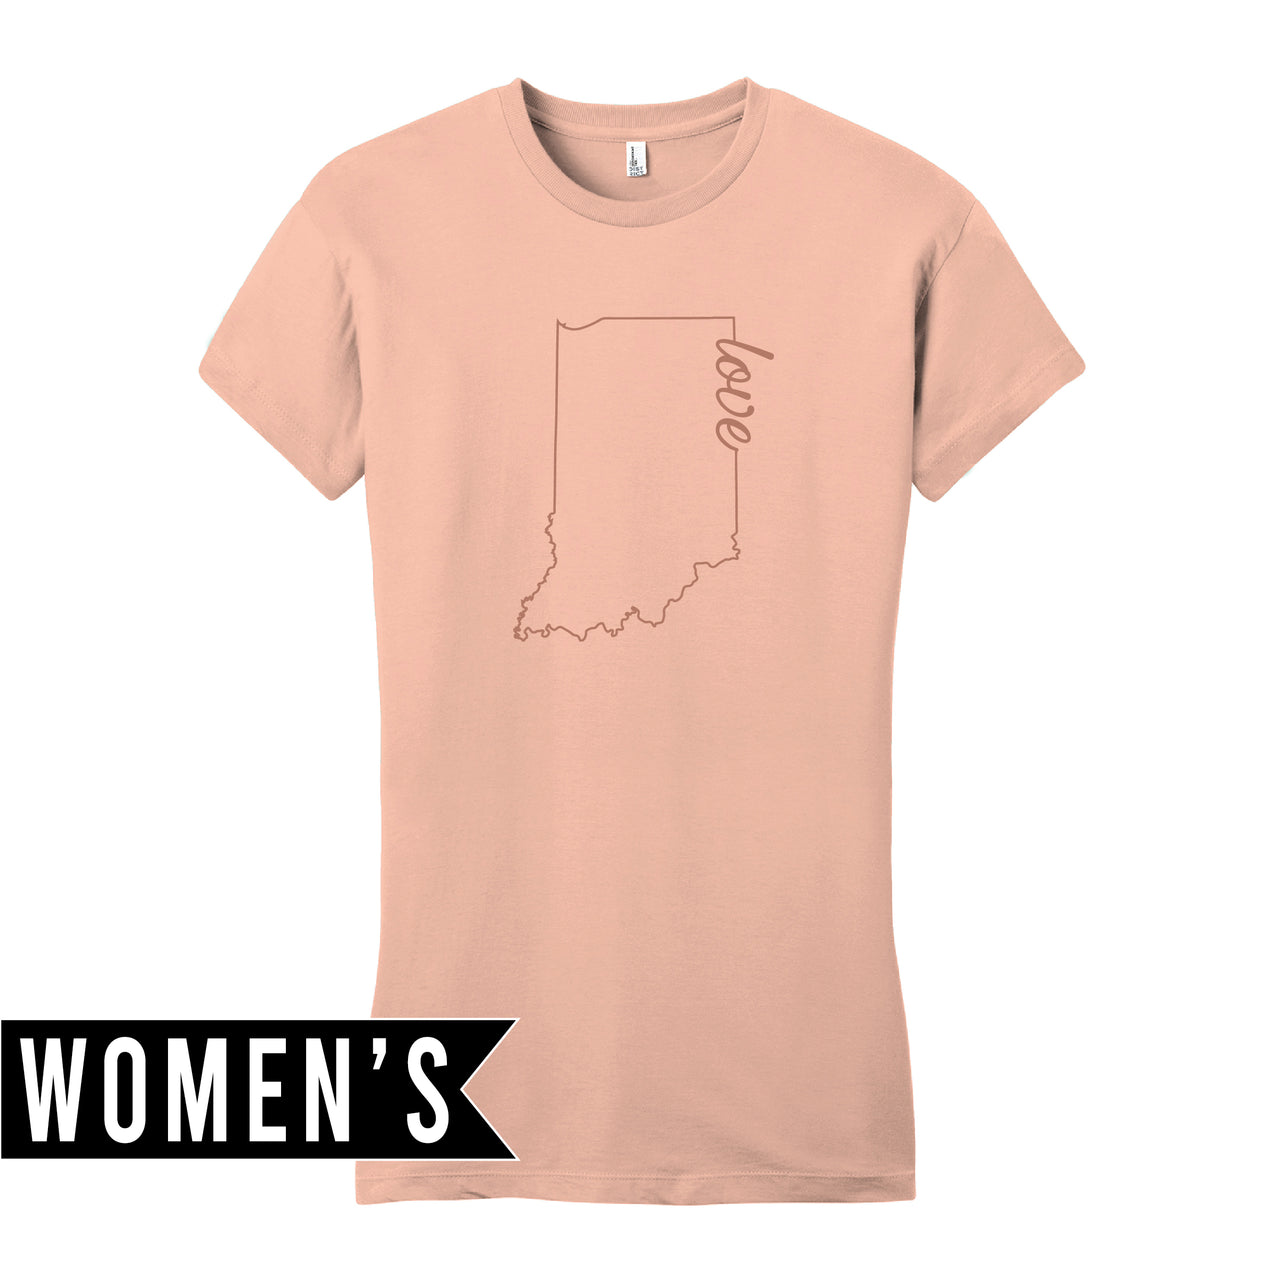 Women’s Fitted T-Shirt - Indiana Outline Love